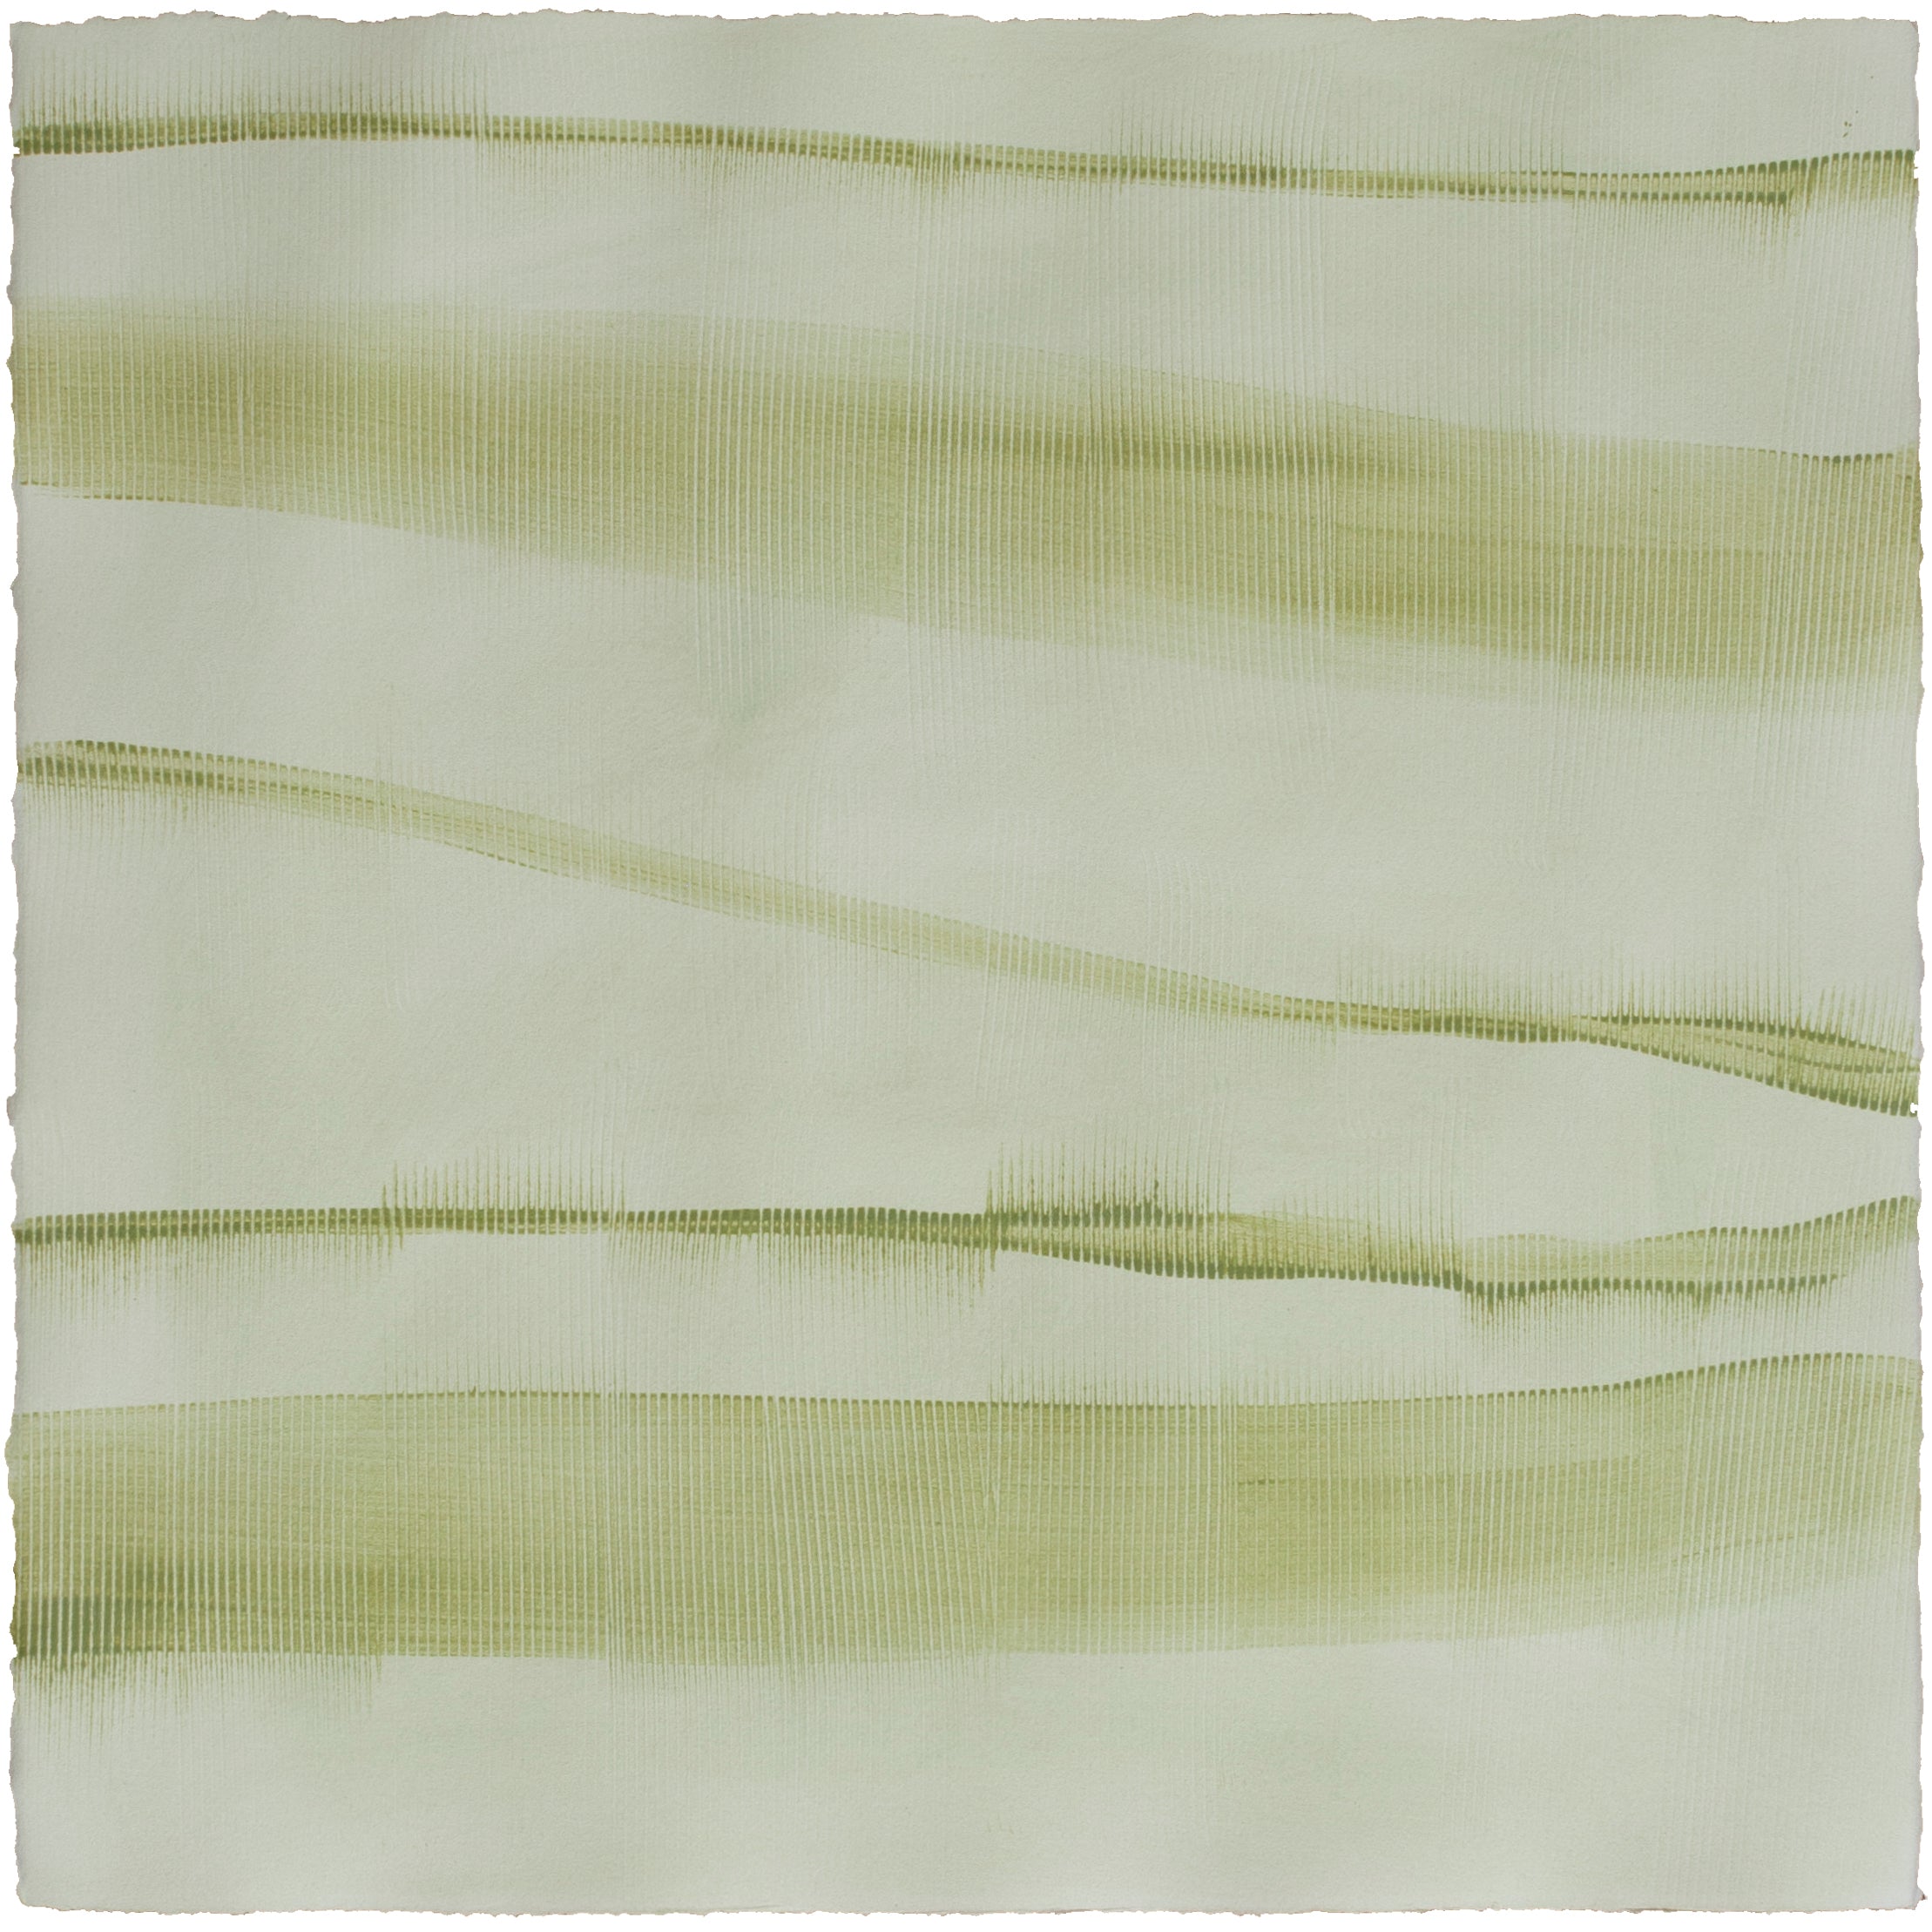 Sheet of hand-painted wallpaper with an irregular combed stripe pattern in green on a light sage field.